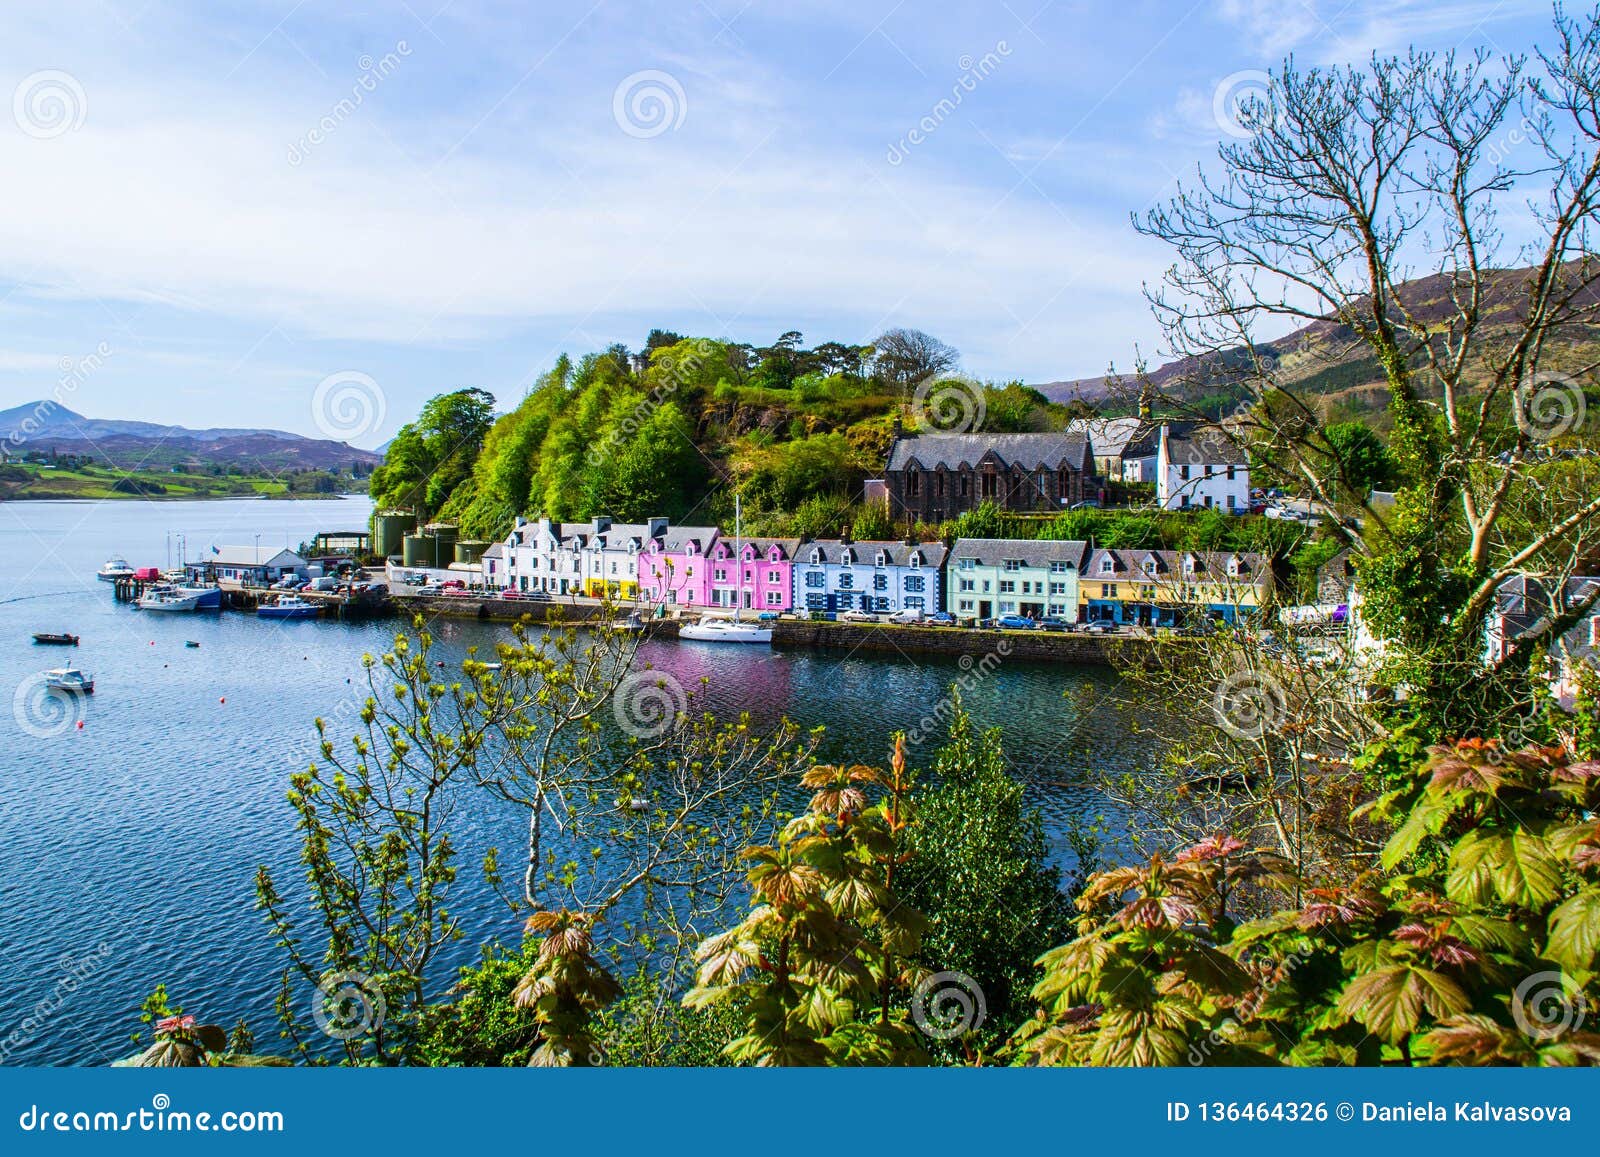 harbour and colorful building in potree, isle of skye, scotland